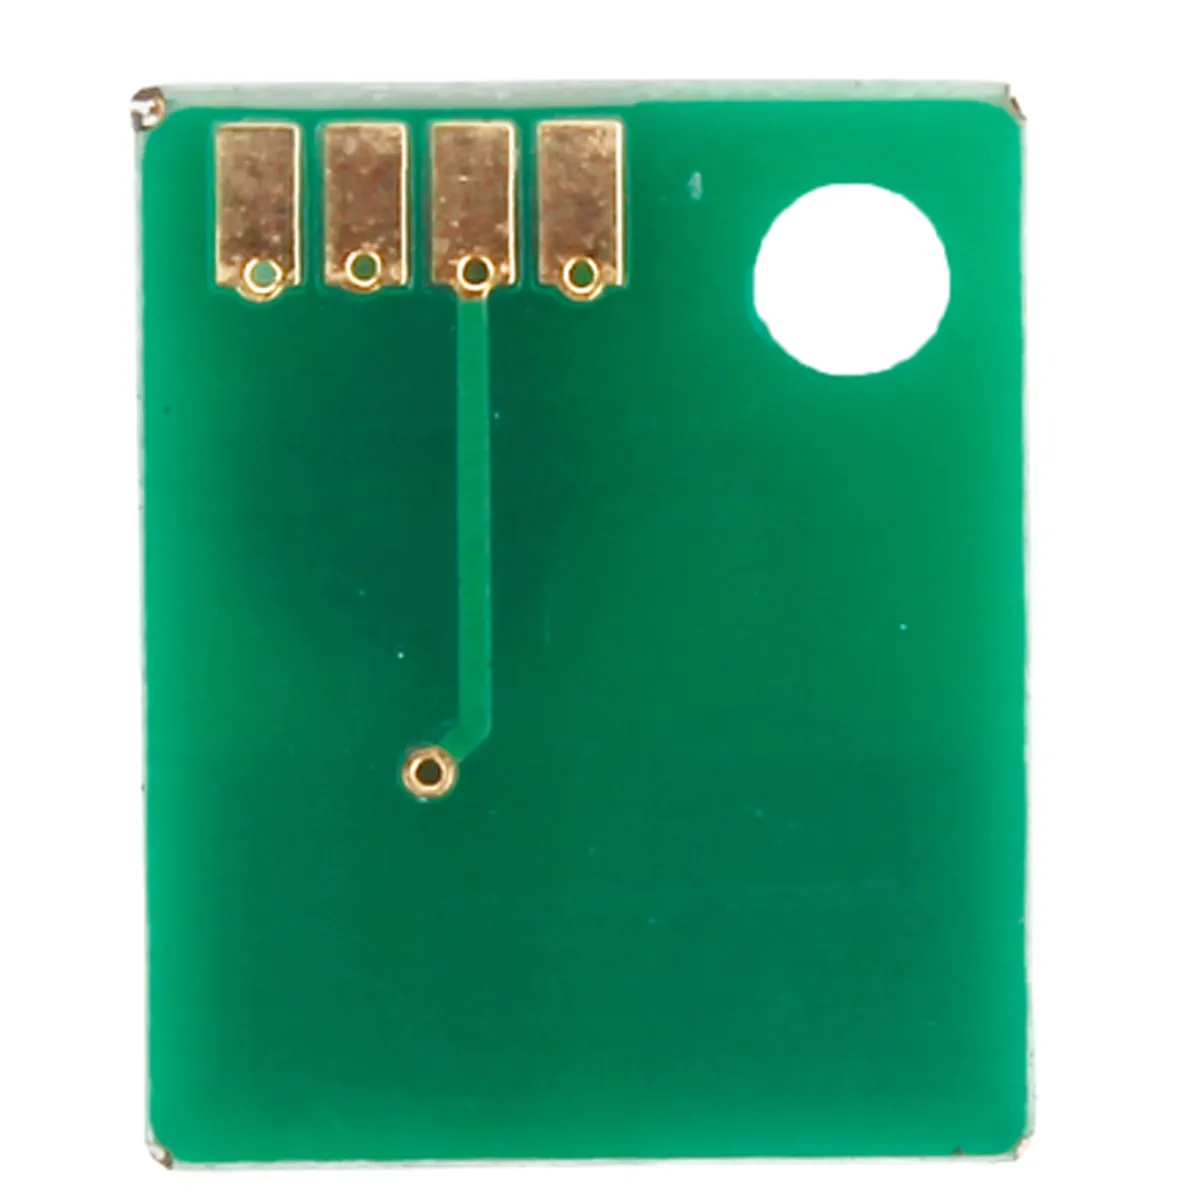 Toner chip for Dell 1700 (Printer used in 310 5402)